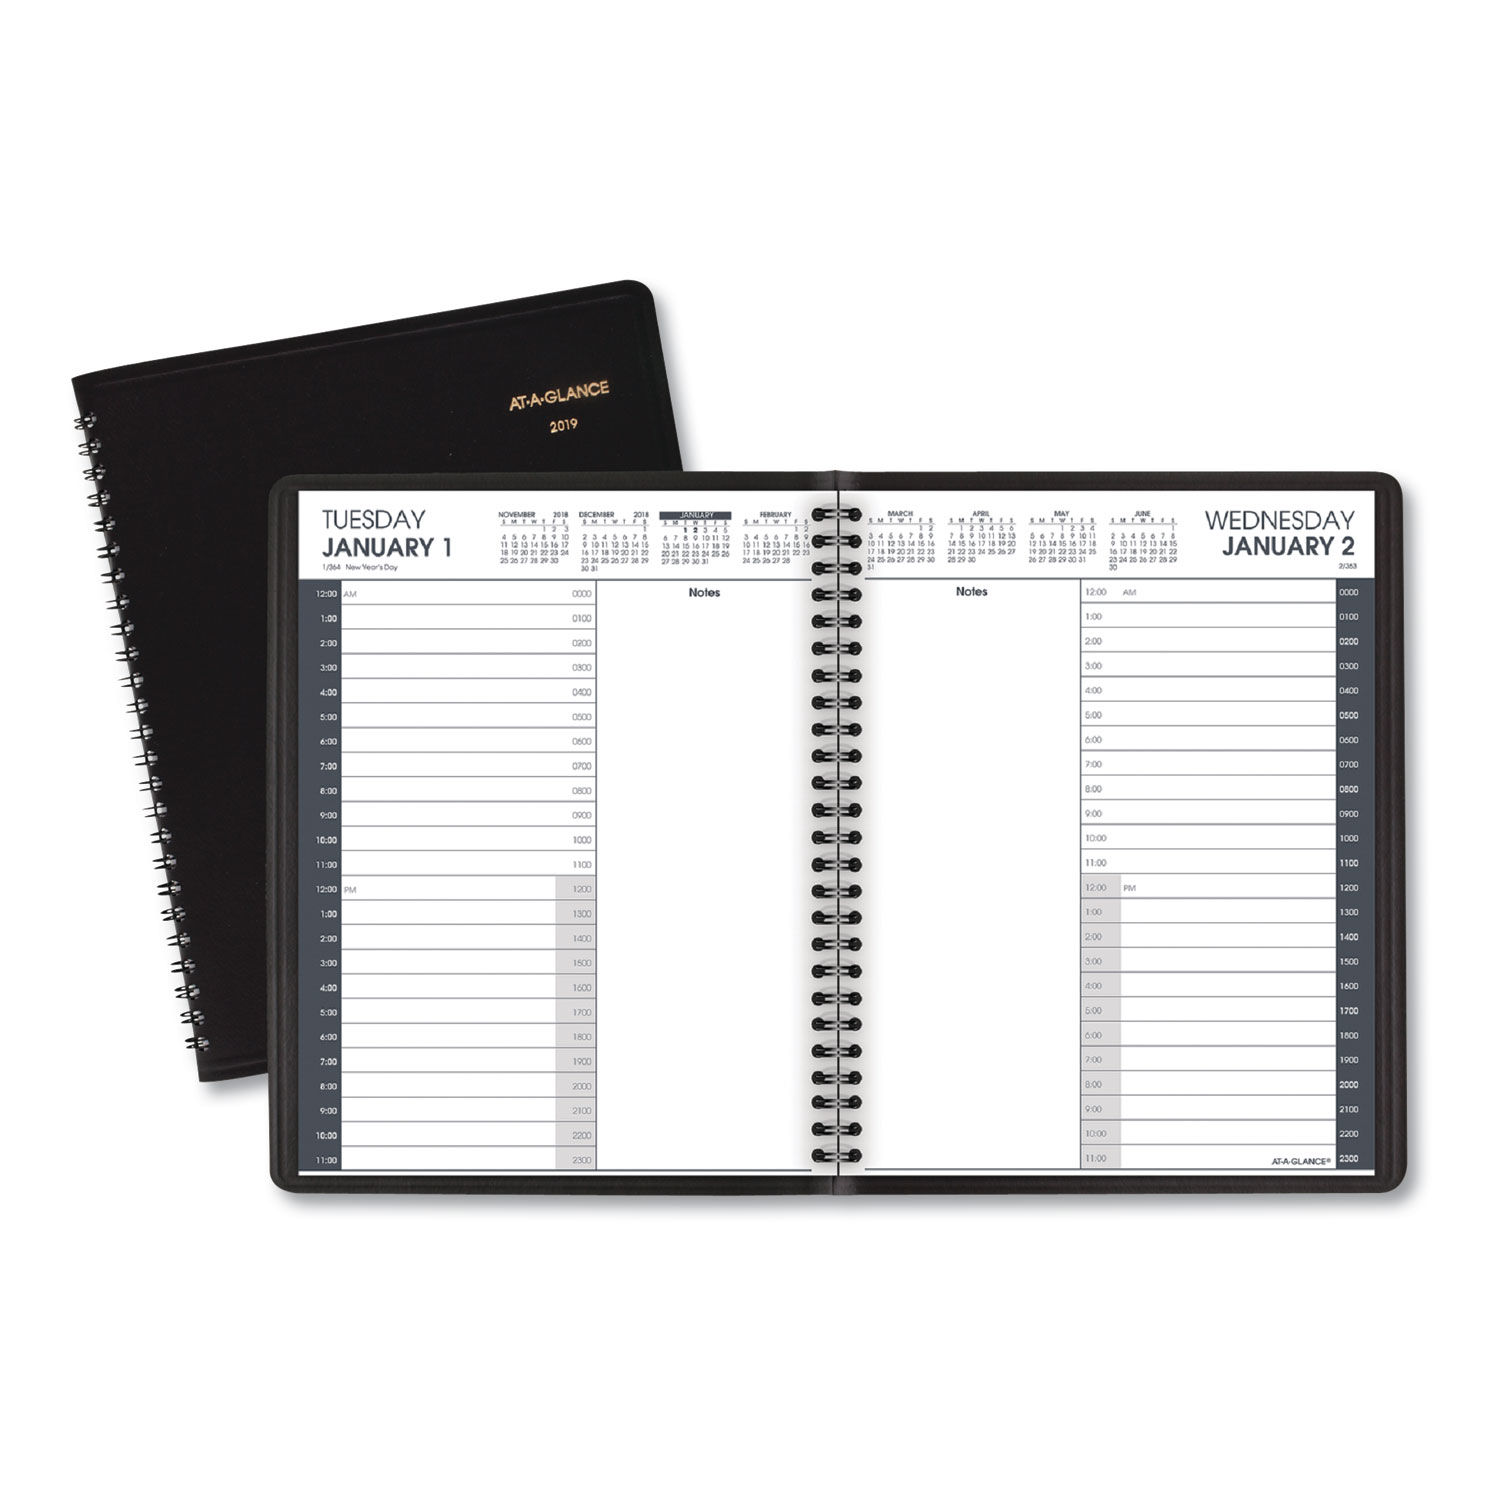 24-hour Daily Appointment Book By At-a-glance® Aag7082405 